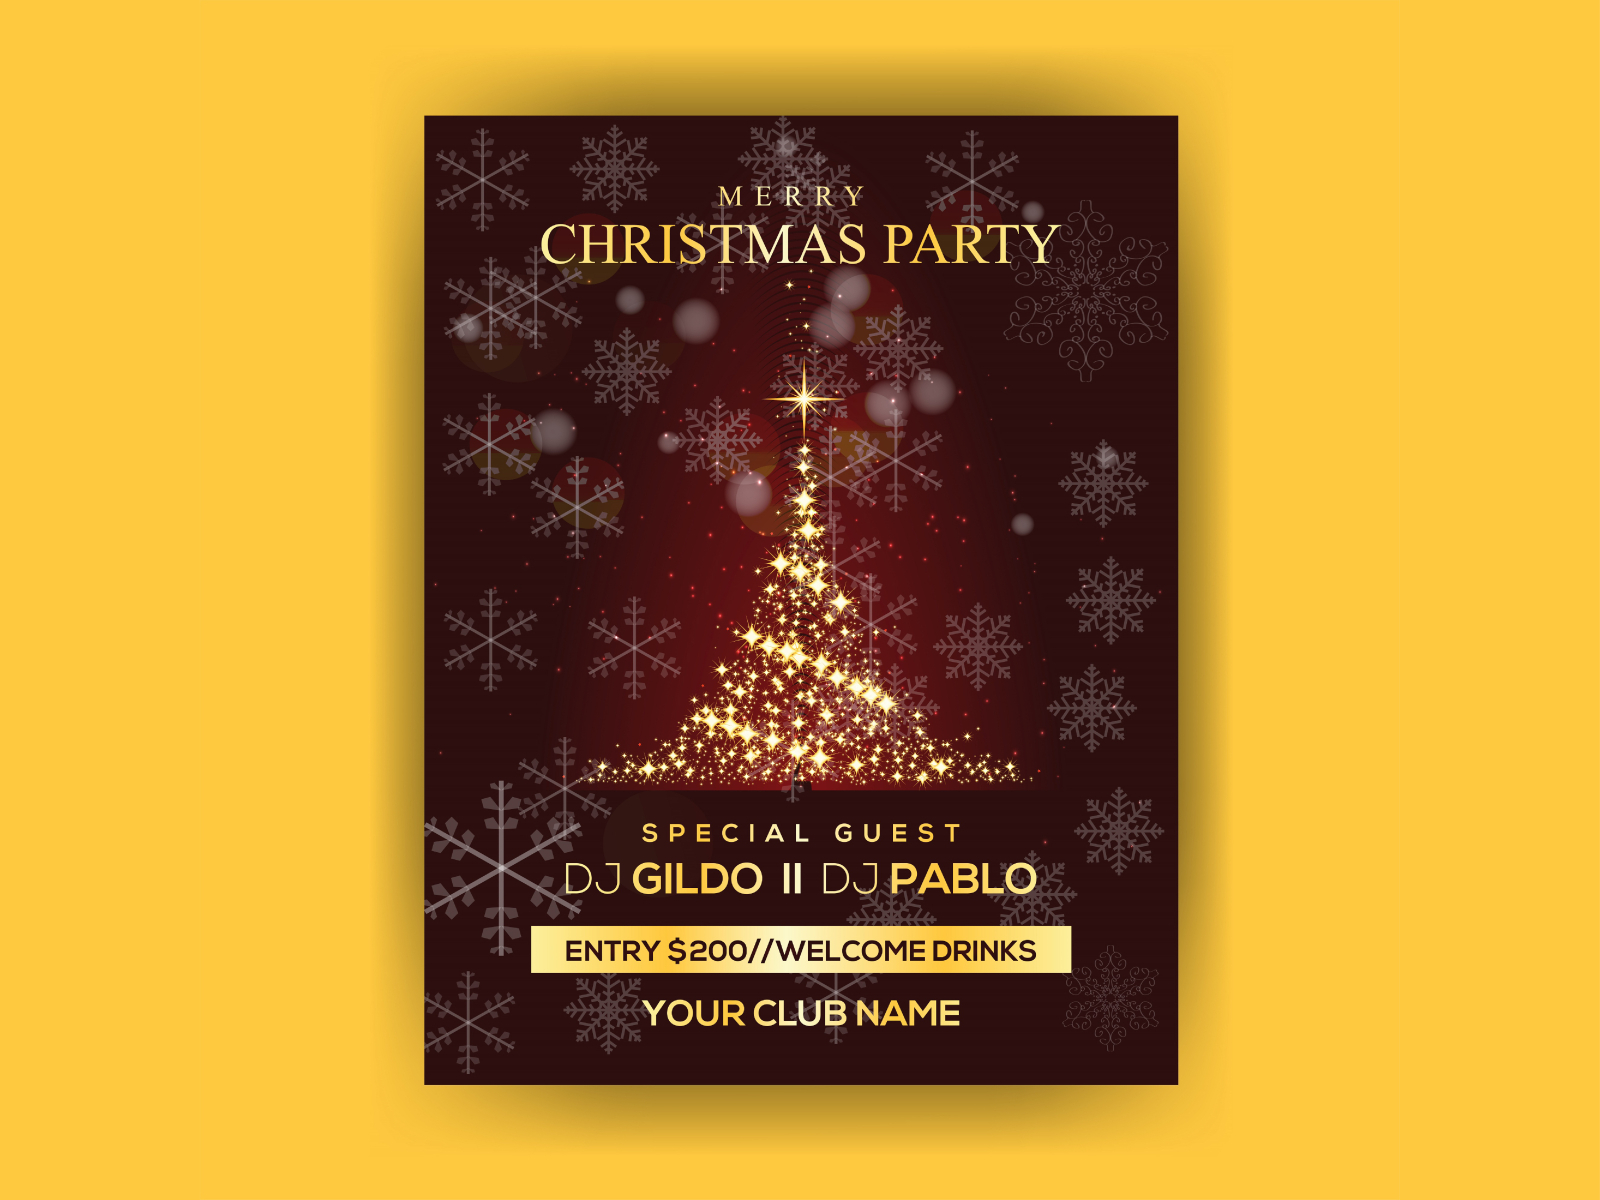 Christmas party flyer design by Design Empire on Dribbble